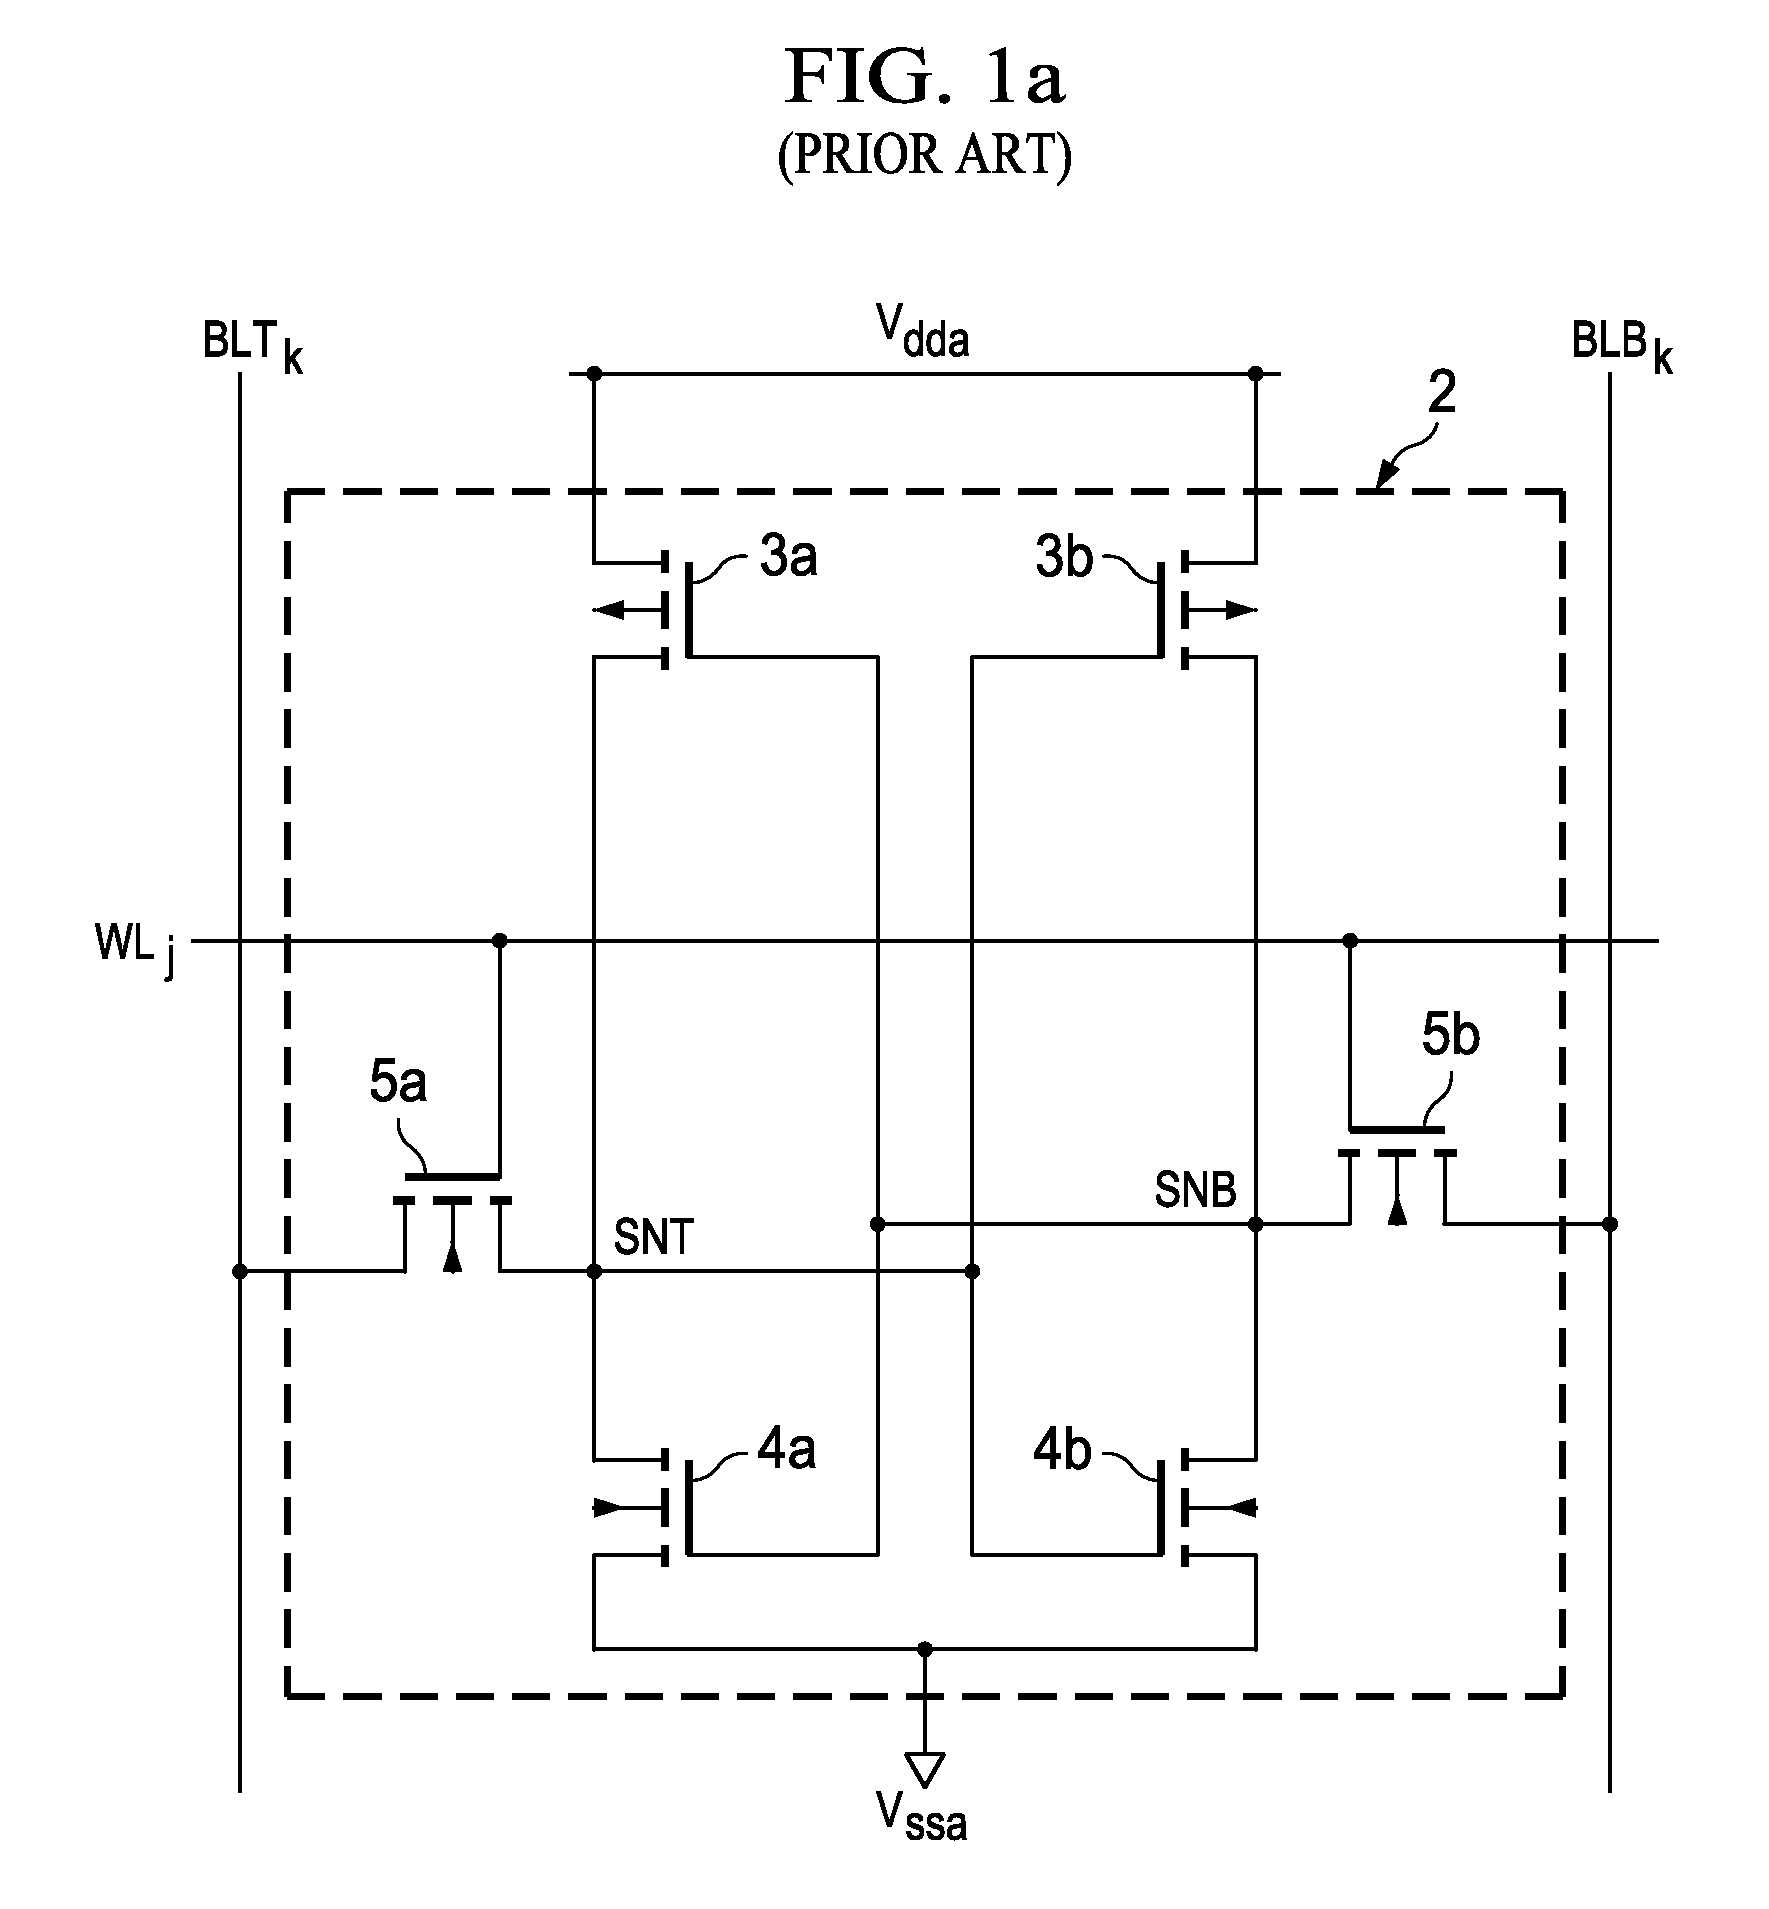 Asymmetric static random access memory cell with dual stress liner